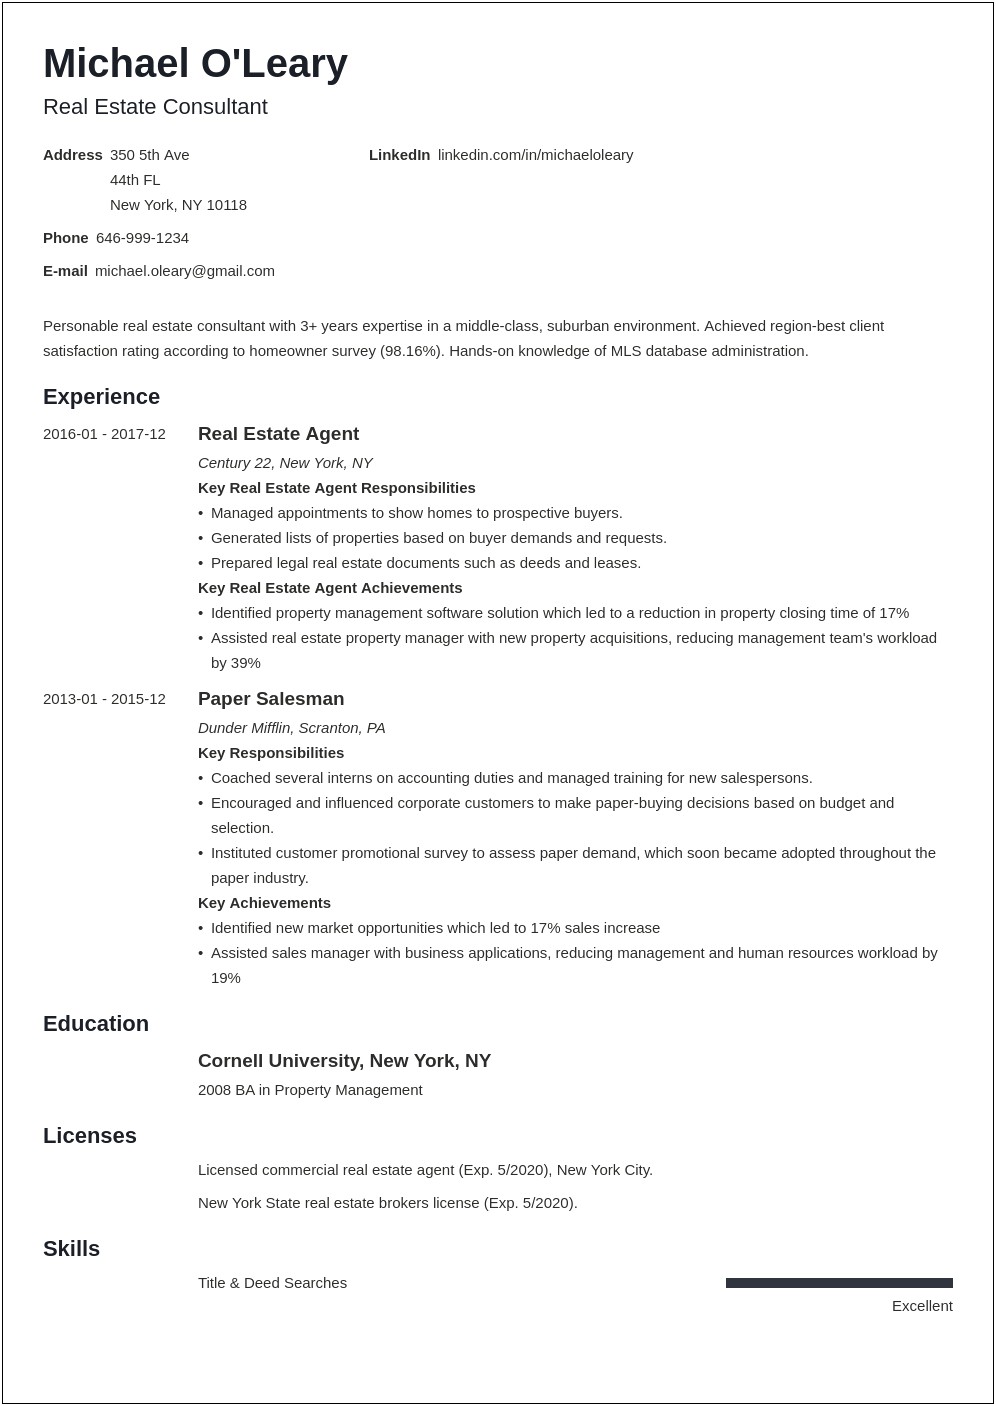 Sample Resumes For A New Real Estate Agent